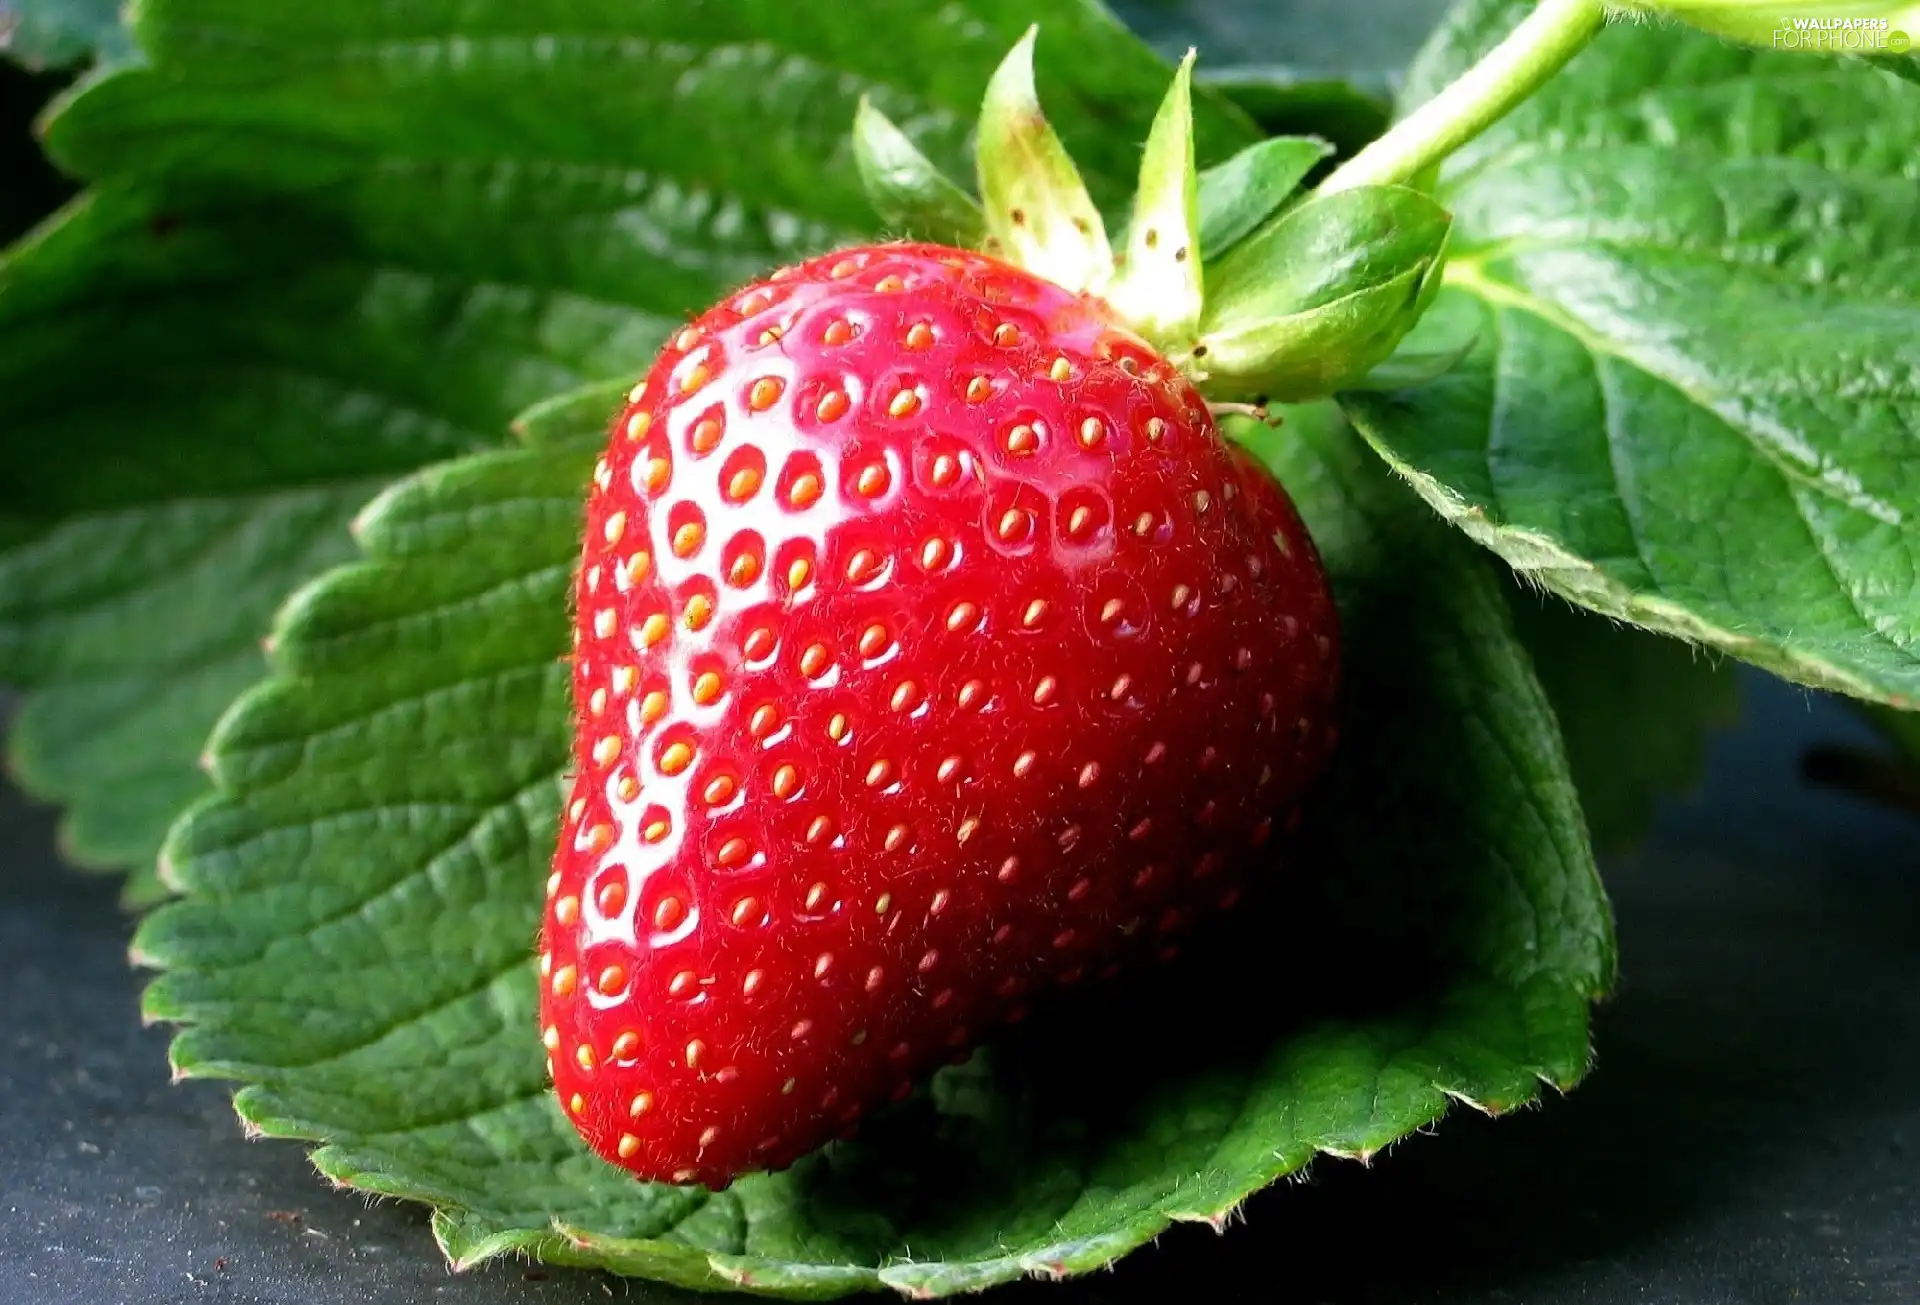 leaves, Strawberry, green ones